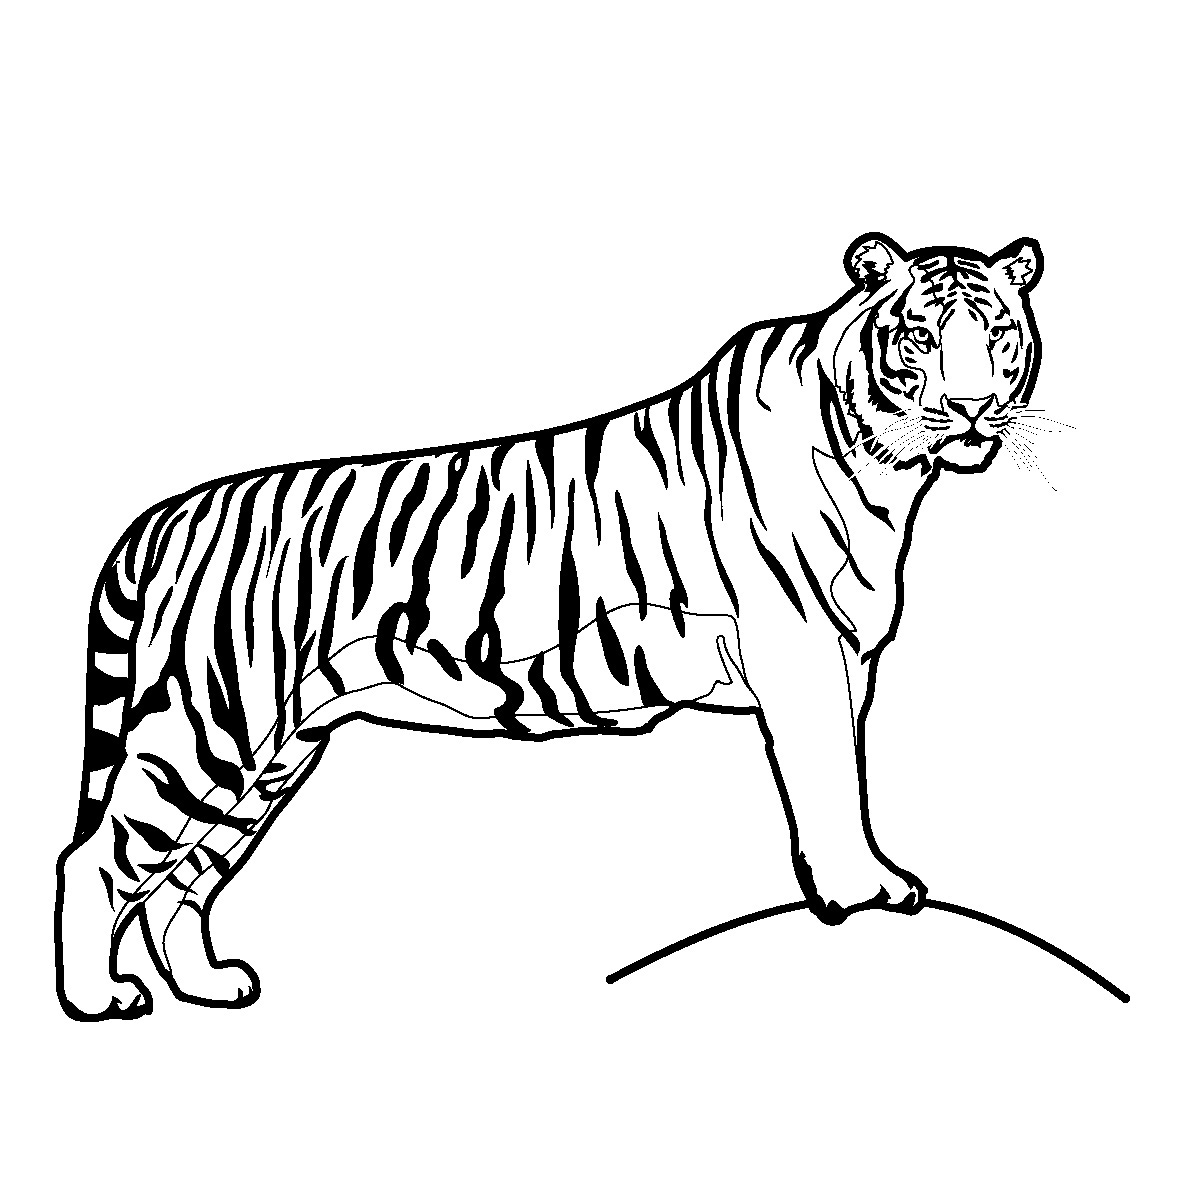 Tiger Clipart Black And White | Clipart library - Free Clipart Images